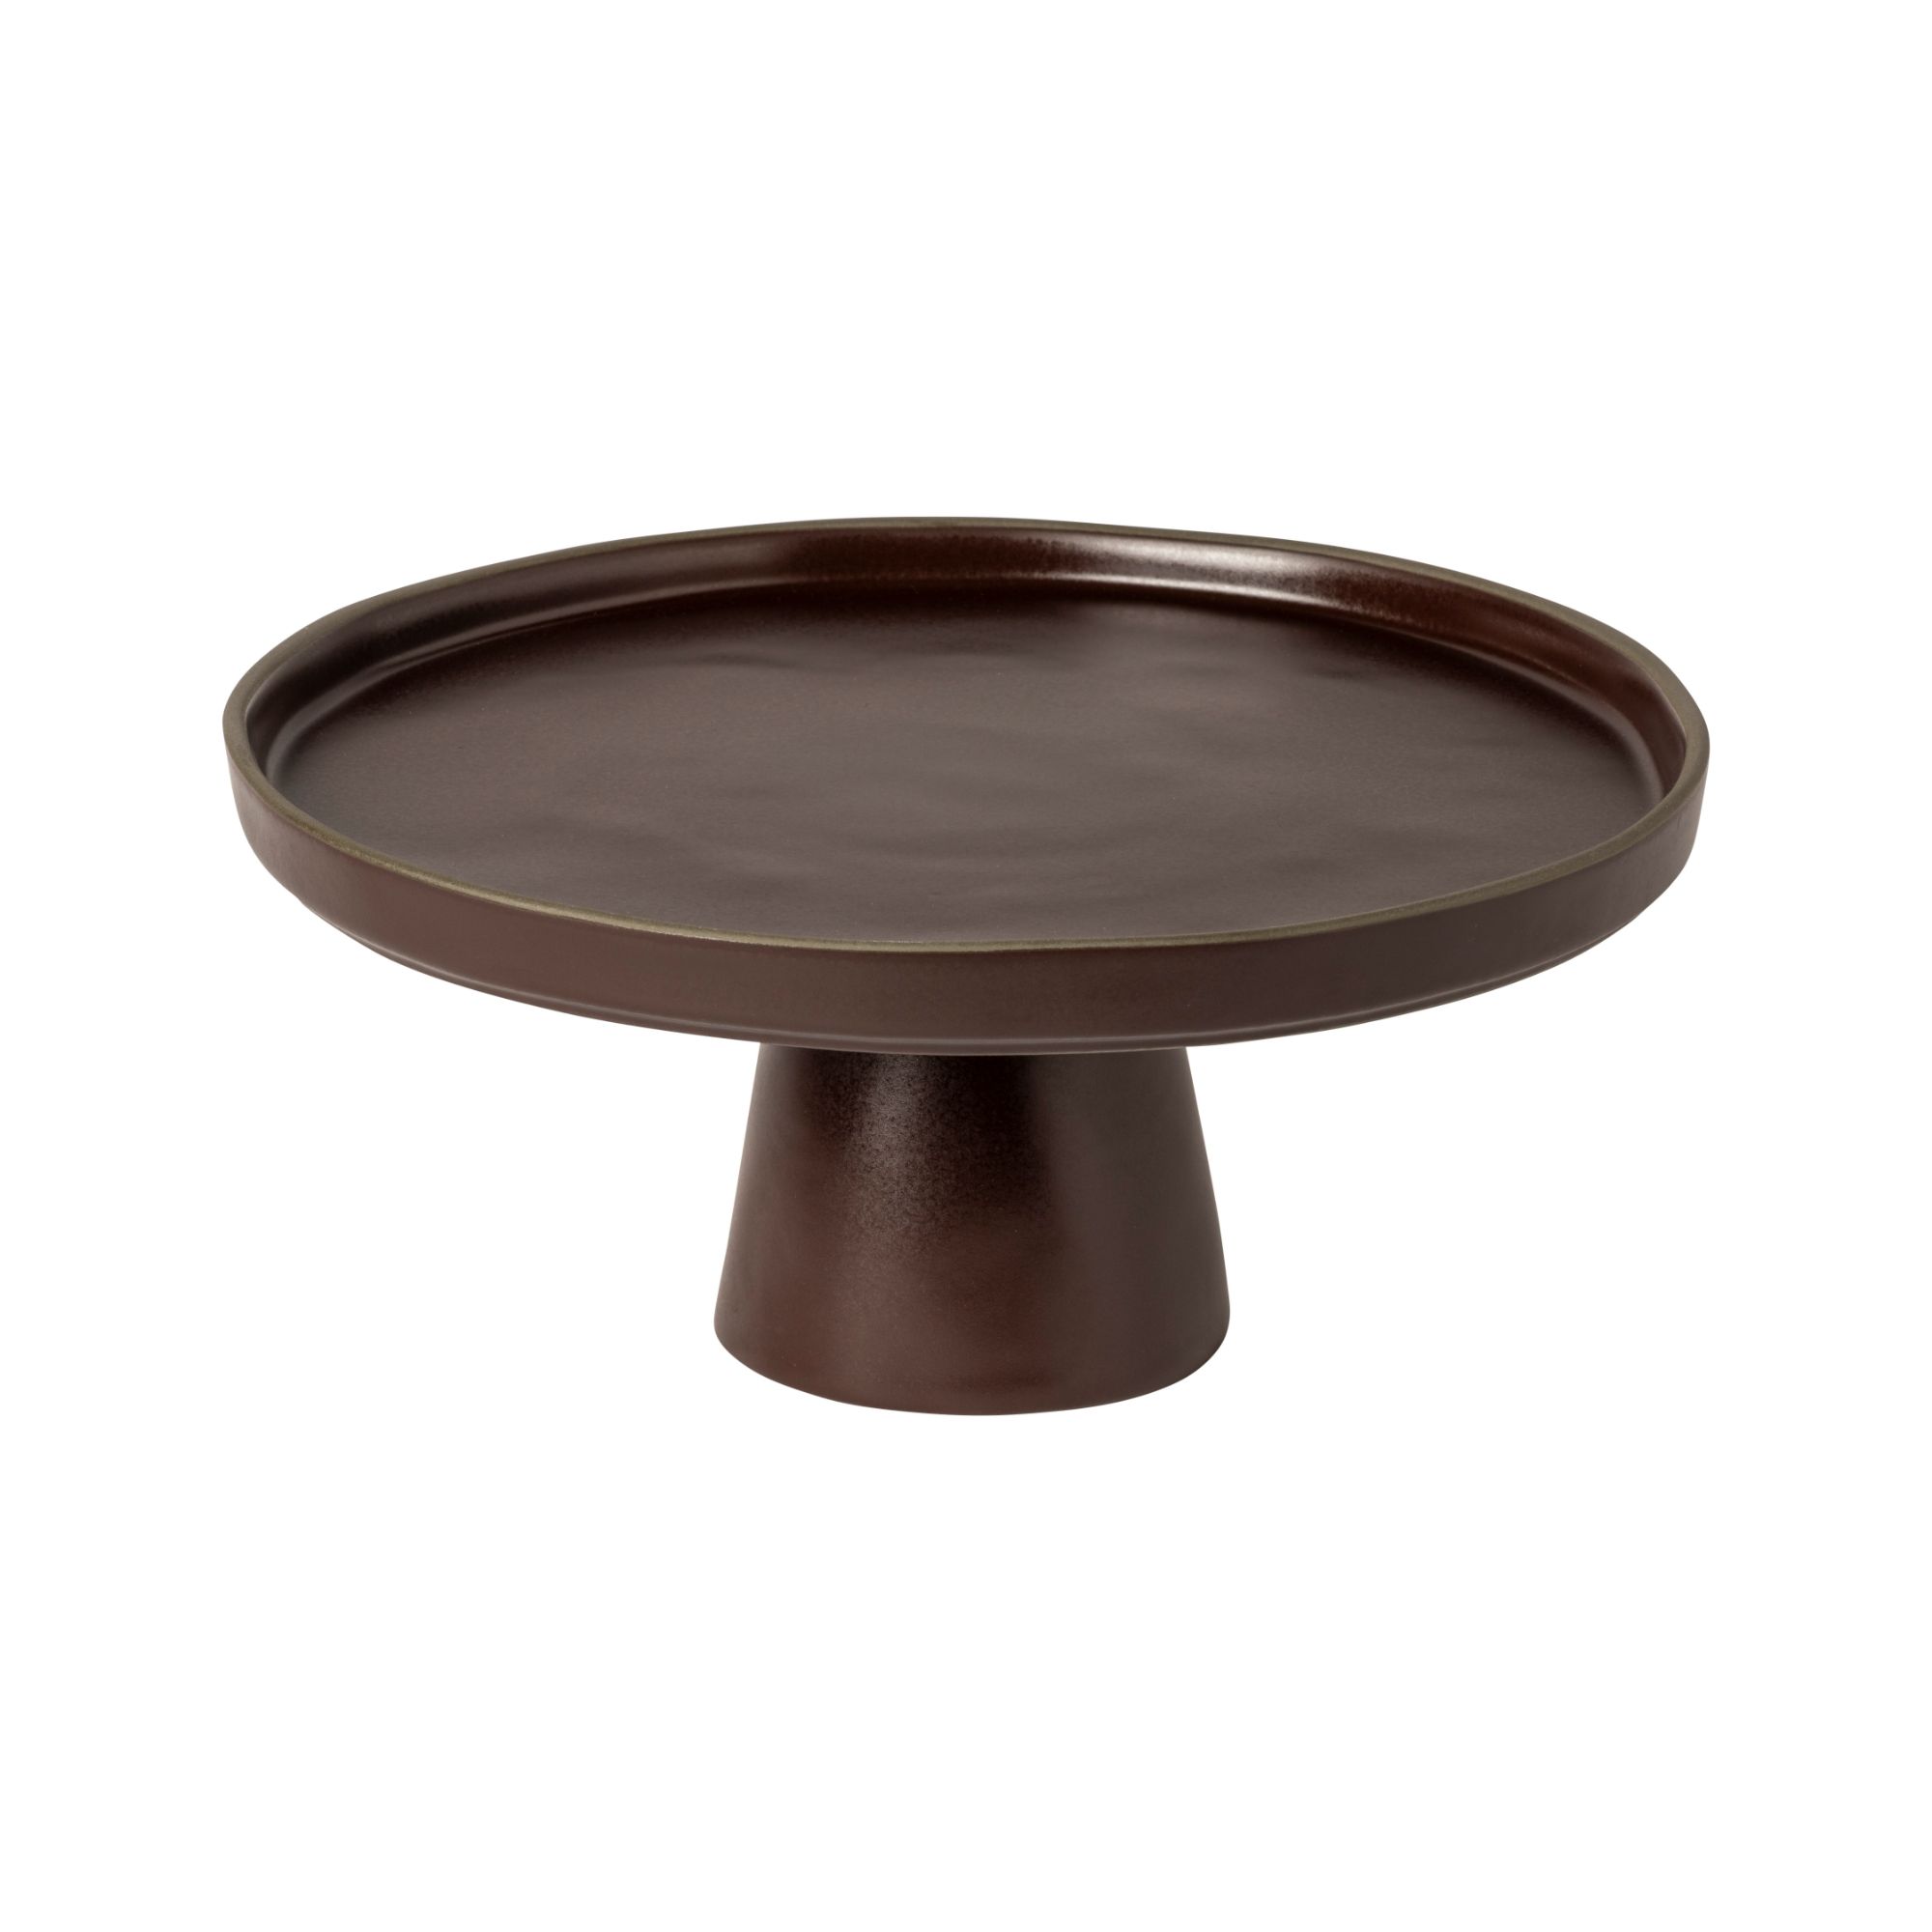 Stacked Organic Port Footed Plate 28cm Gift